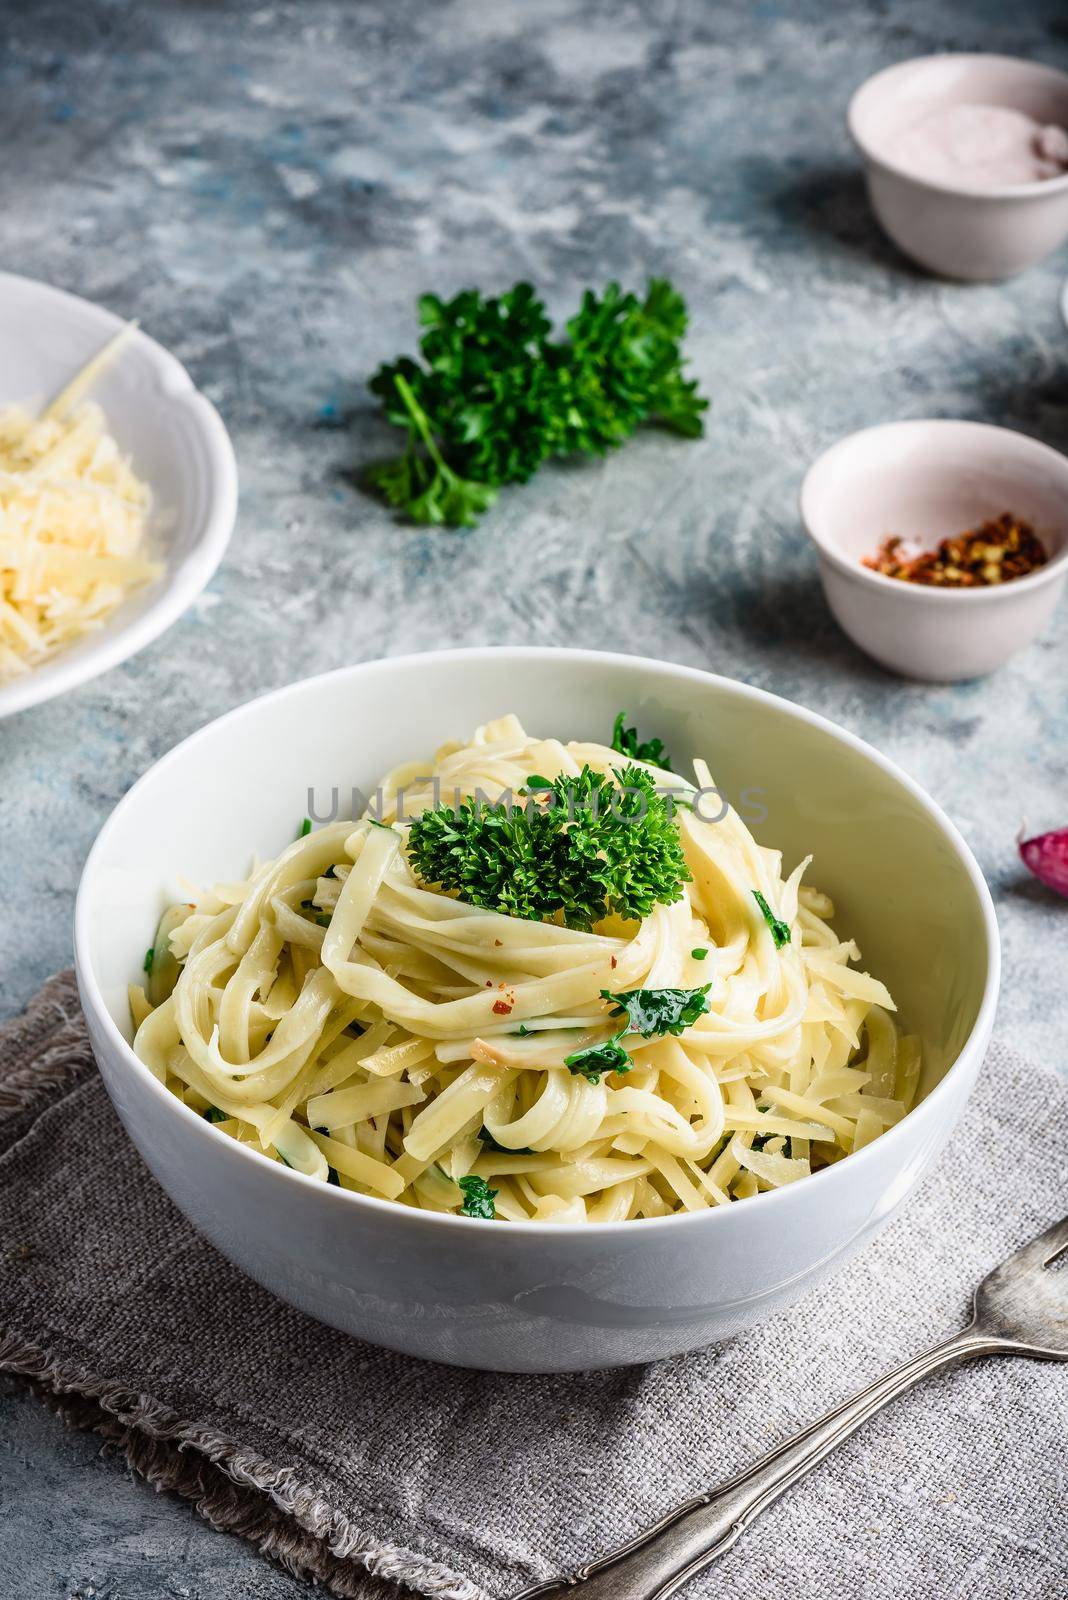 Easy pasta with olive oil and garlic by Seva_blsv